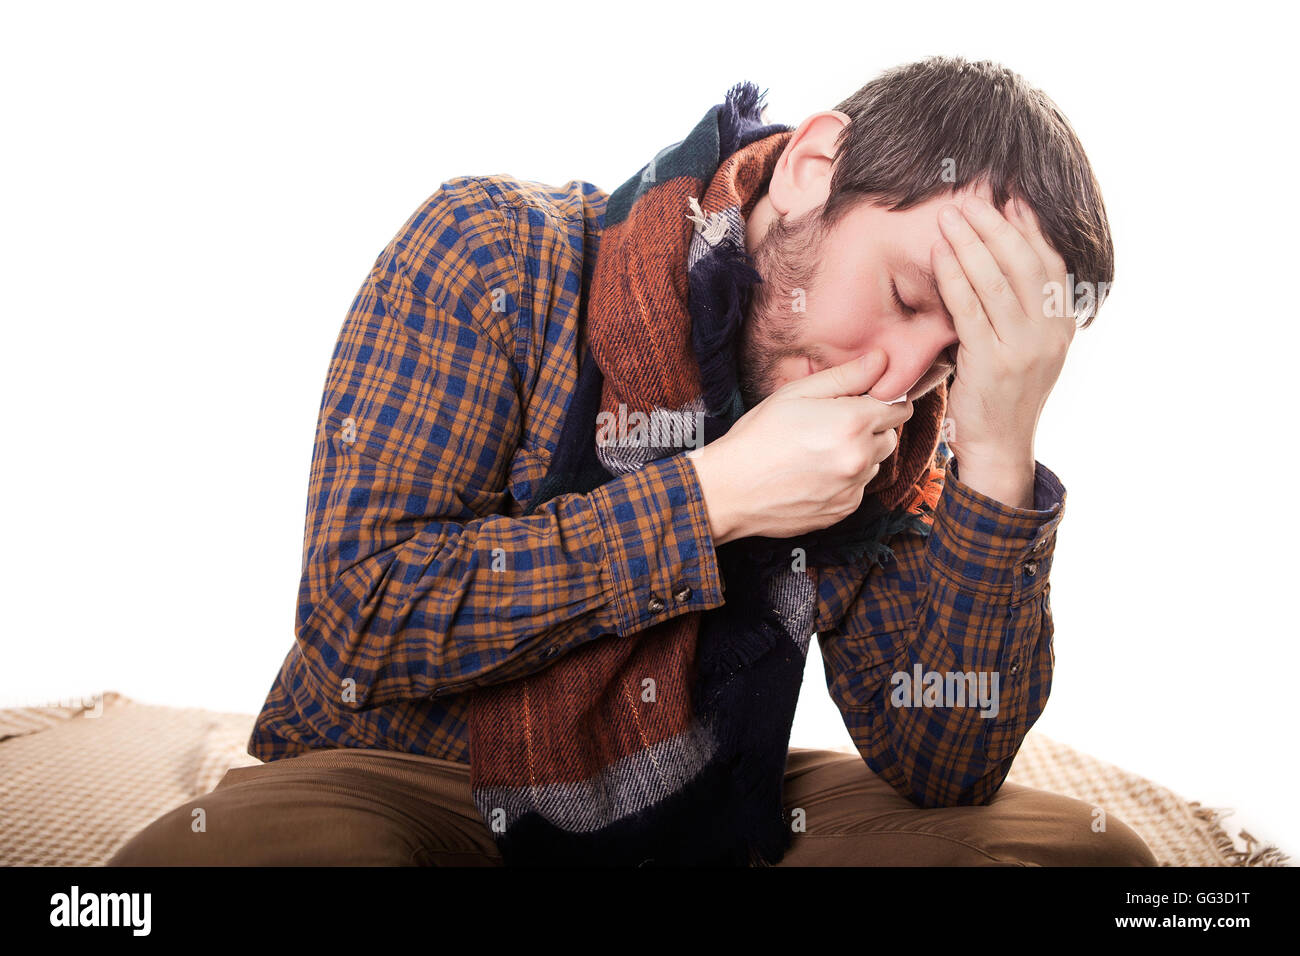 Closeup portrait of sick young man student, worker, employee with allergy, germs cold, blowing his nose with kleenex, looking very miserable unwell, isolated on white background. Flu season, vaccine Stock Photo